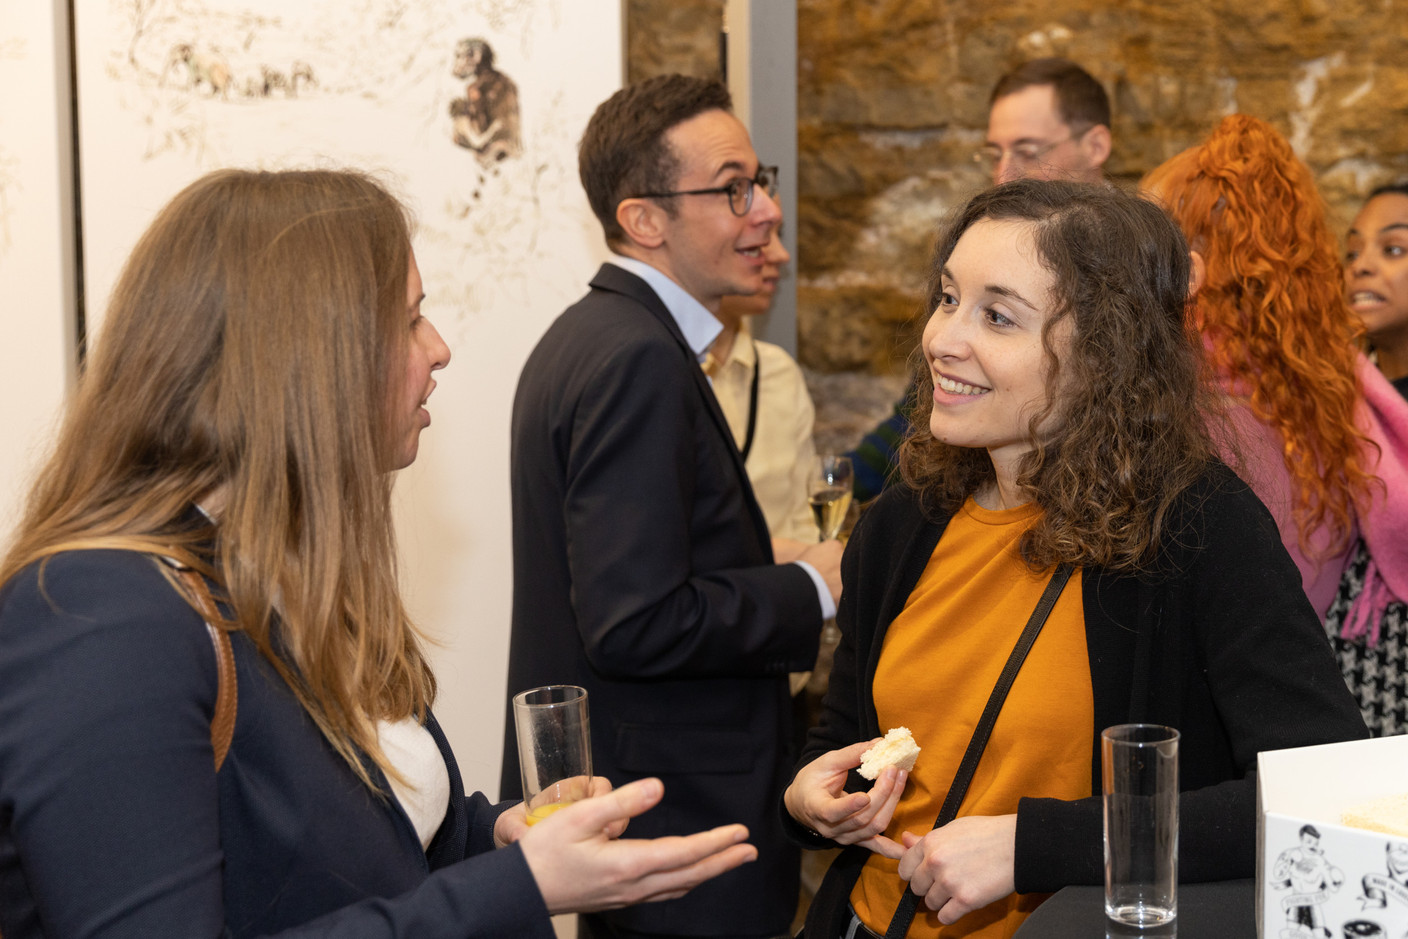 The reception was the first since the start of the covid-19 pandemic Photo: Romain Gamba